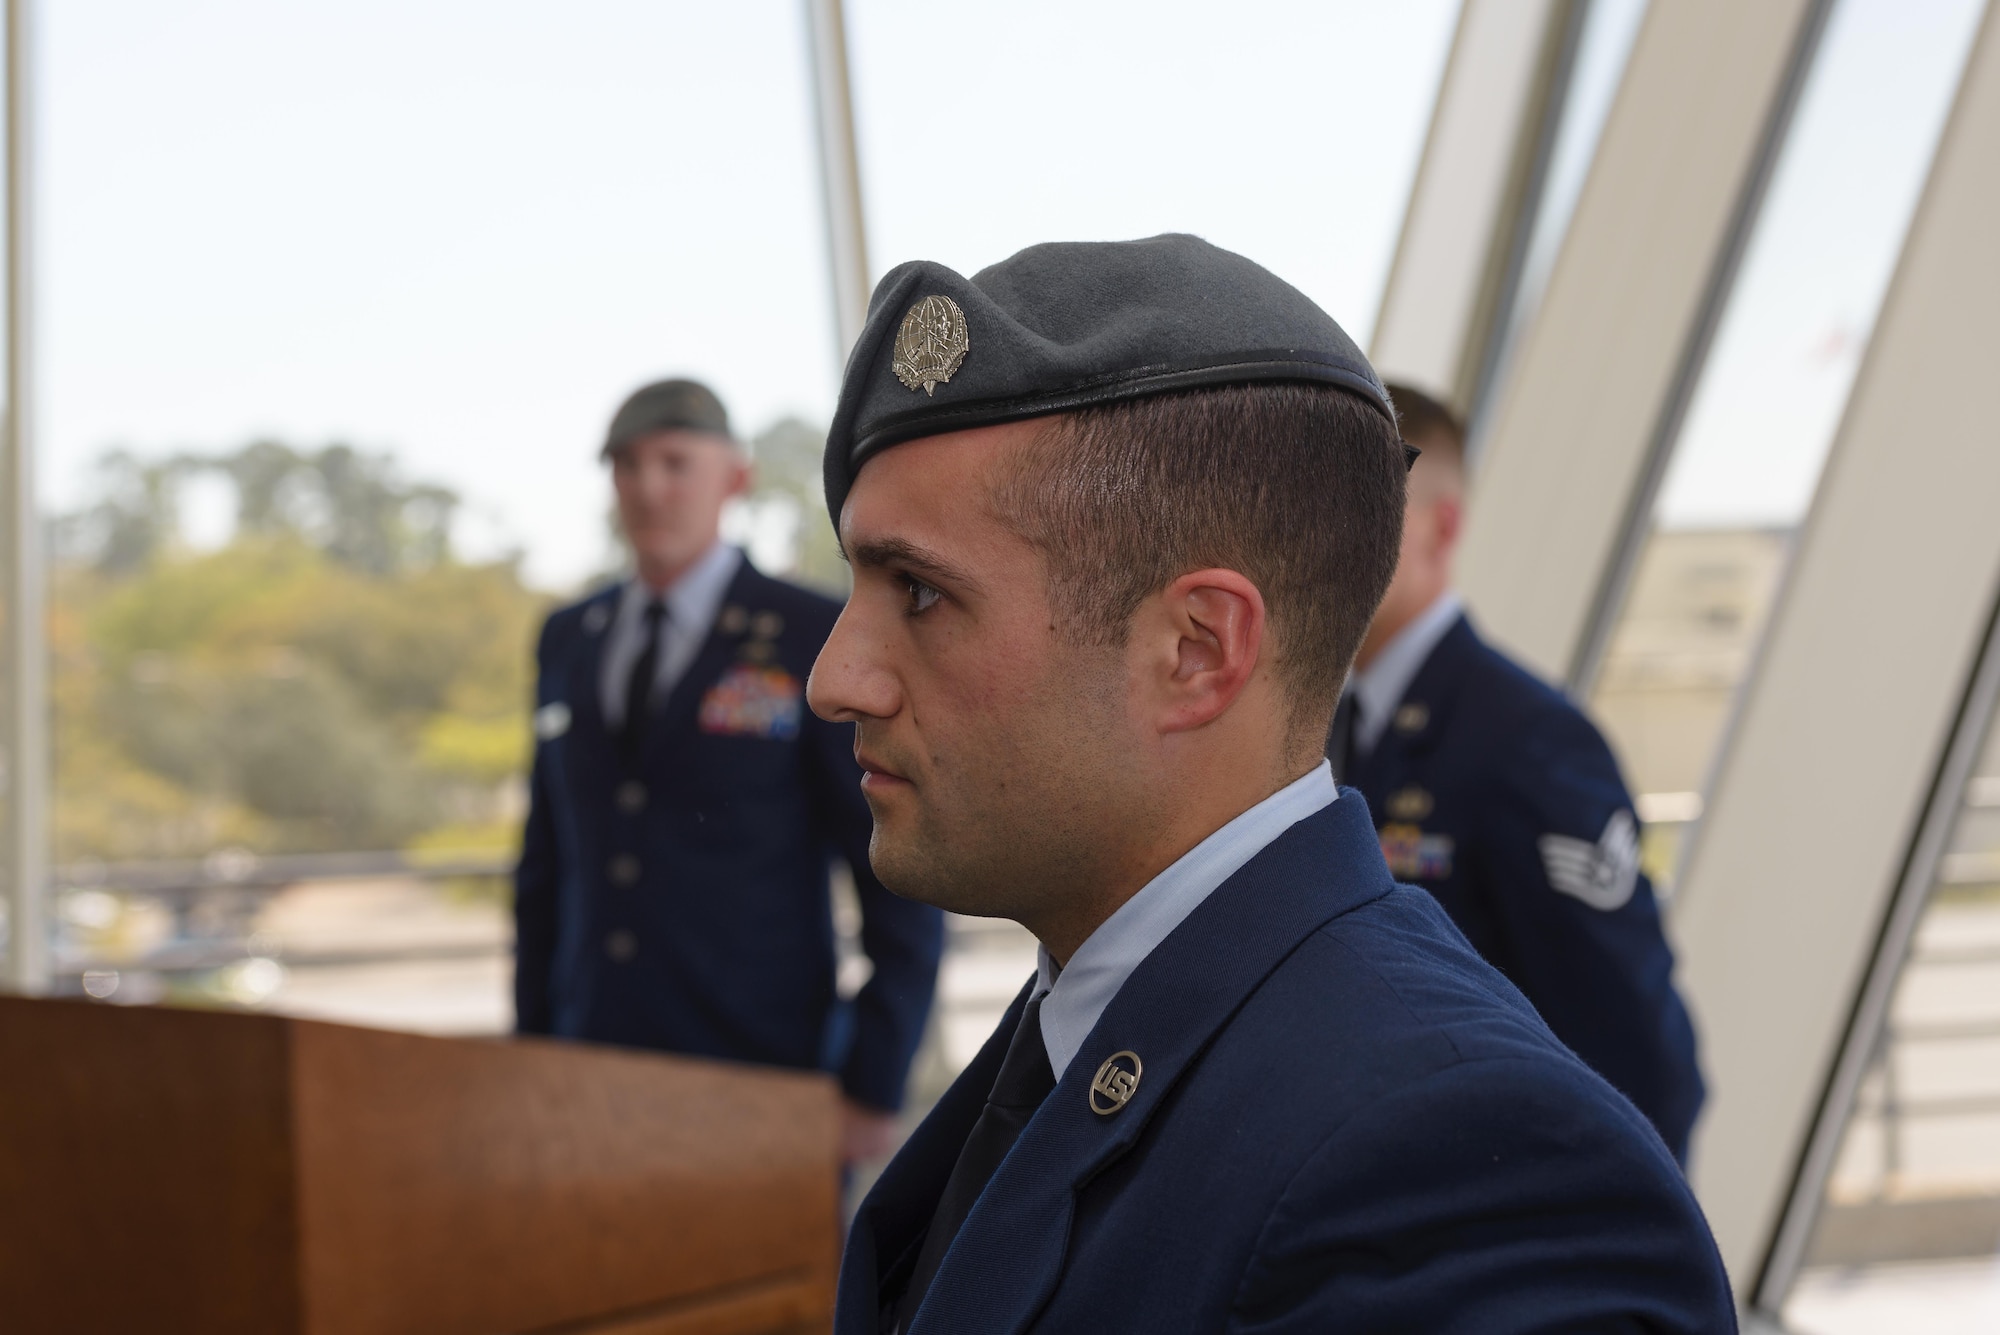 Senior Airman Matthew James, 335th Training Squadron student, receives his Gray Beret during a Special Operations Weather Apprentice Course graduation ceremony at the Weather Training Complex, March 22, 2017, on Keesler Air Force Base, Miss. At his graduation James received his Gray Beret. (U.S. Air Force photo by Andre’ Askew) 